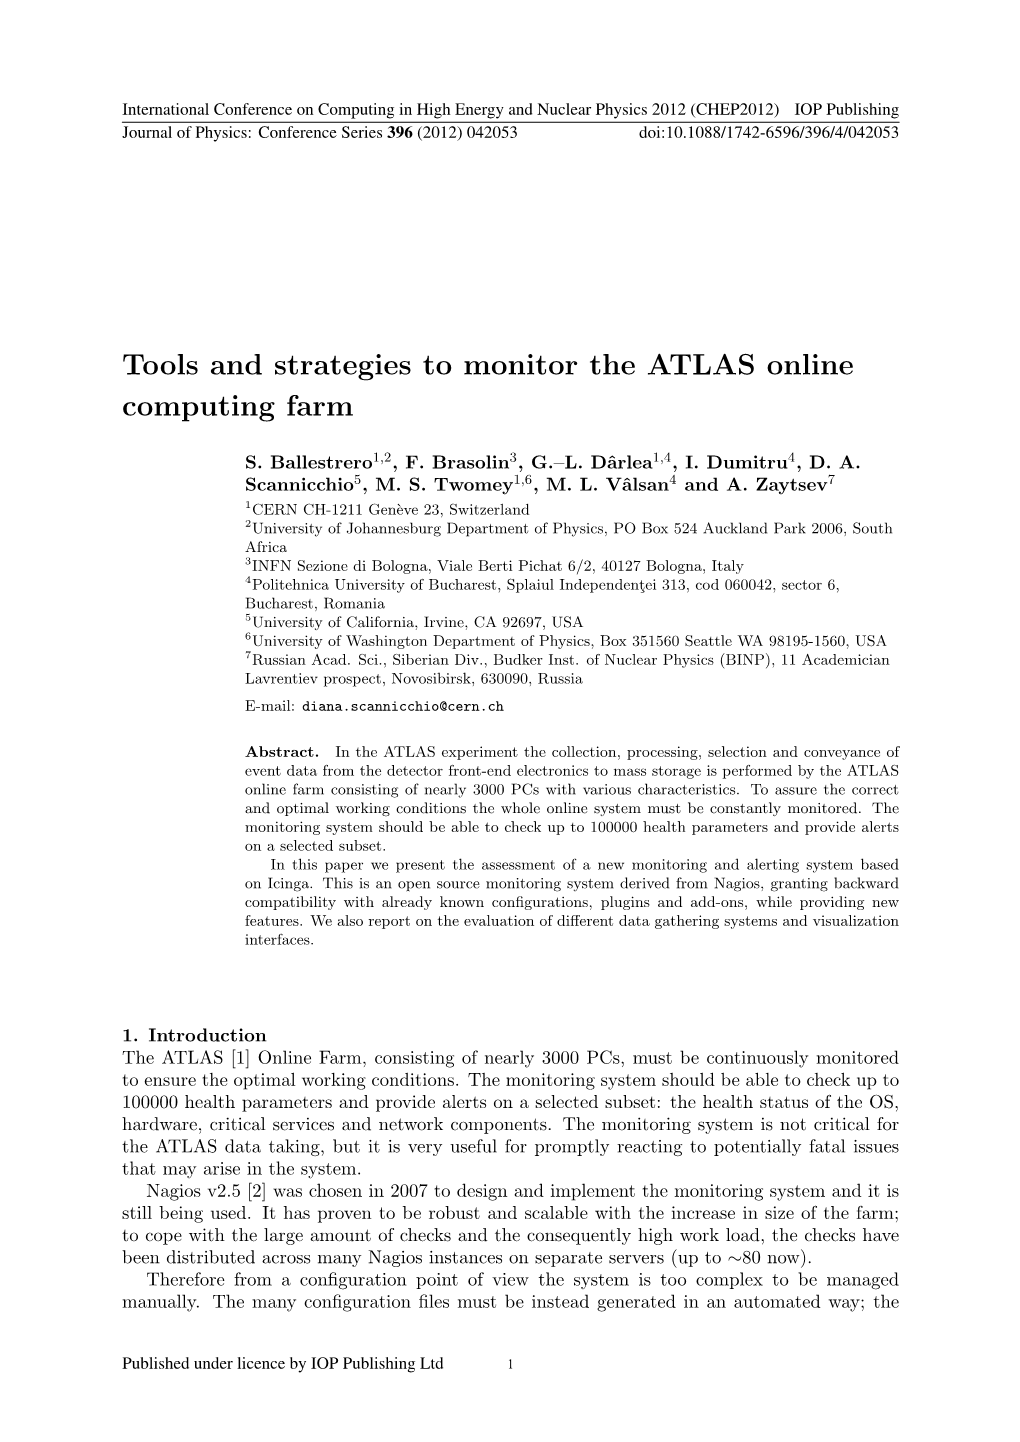 Tools and Strategies to Monitor the ATLAS Online Computing Farm